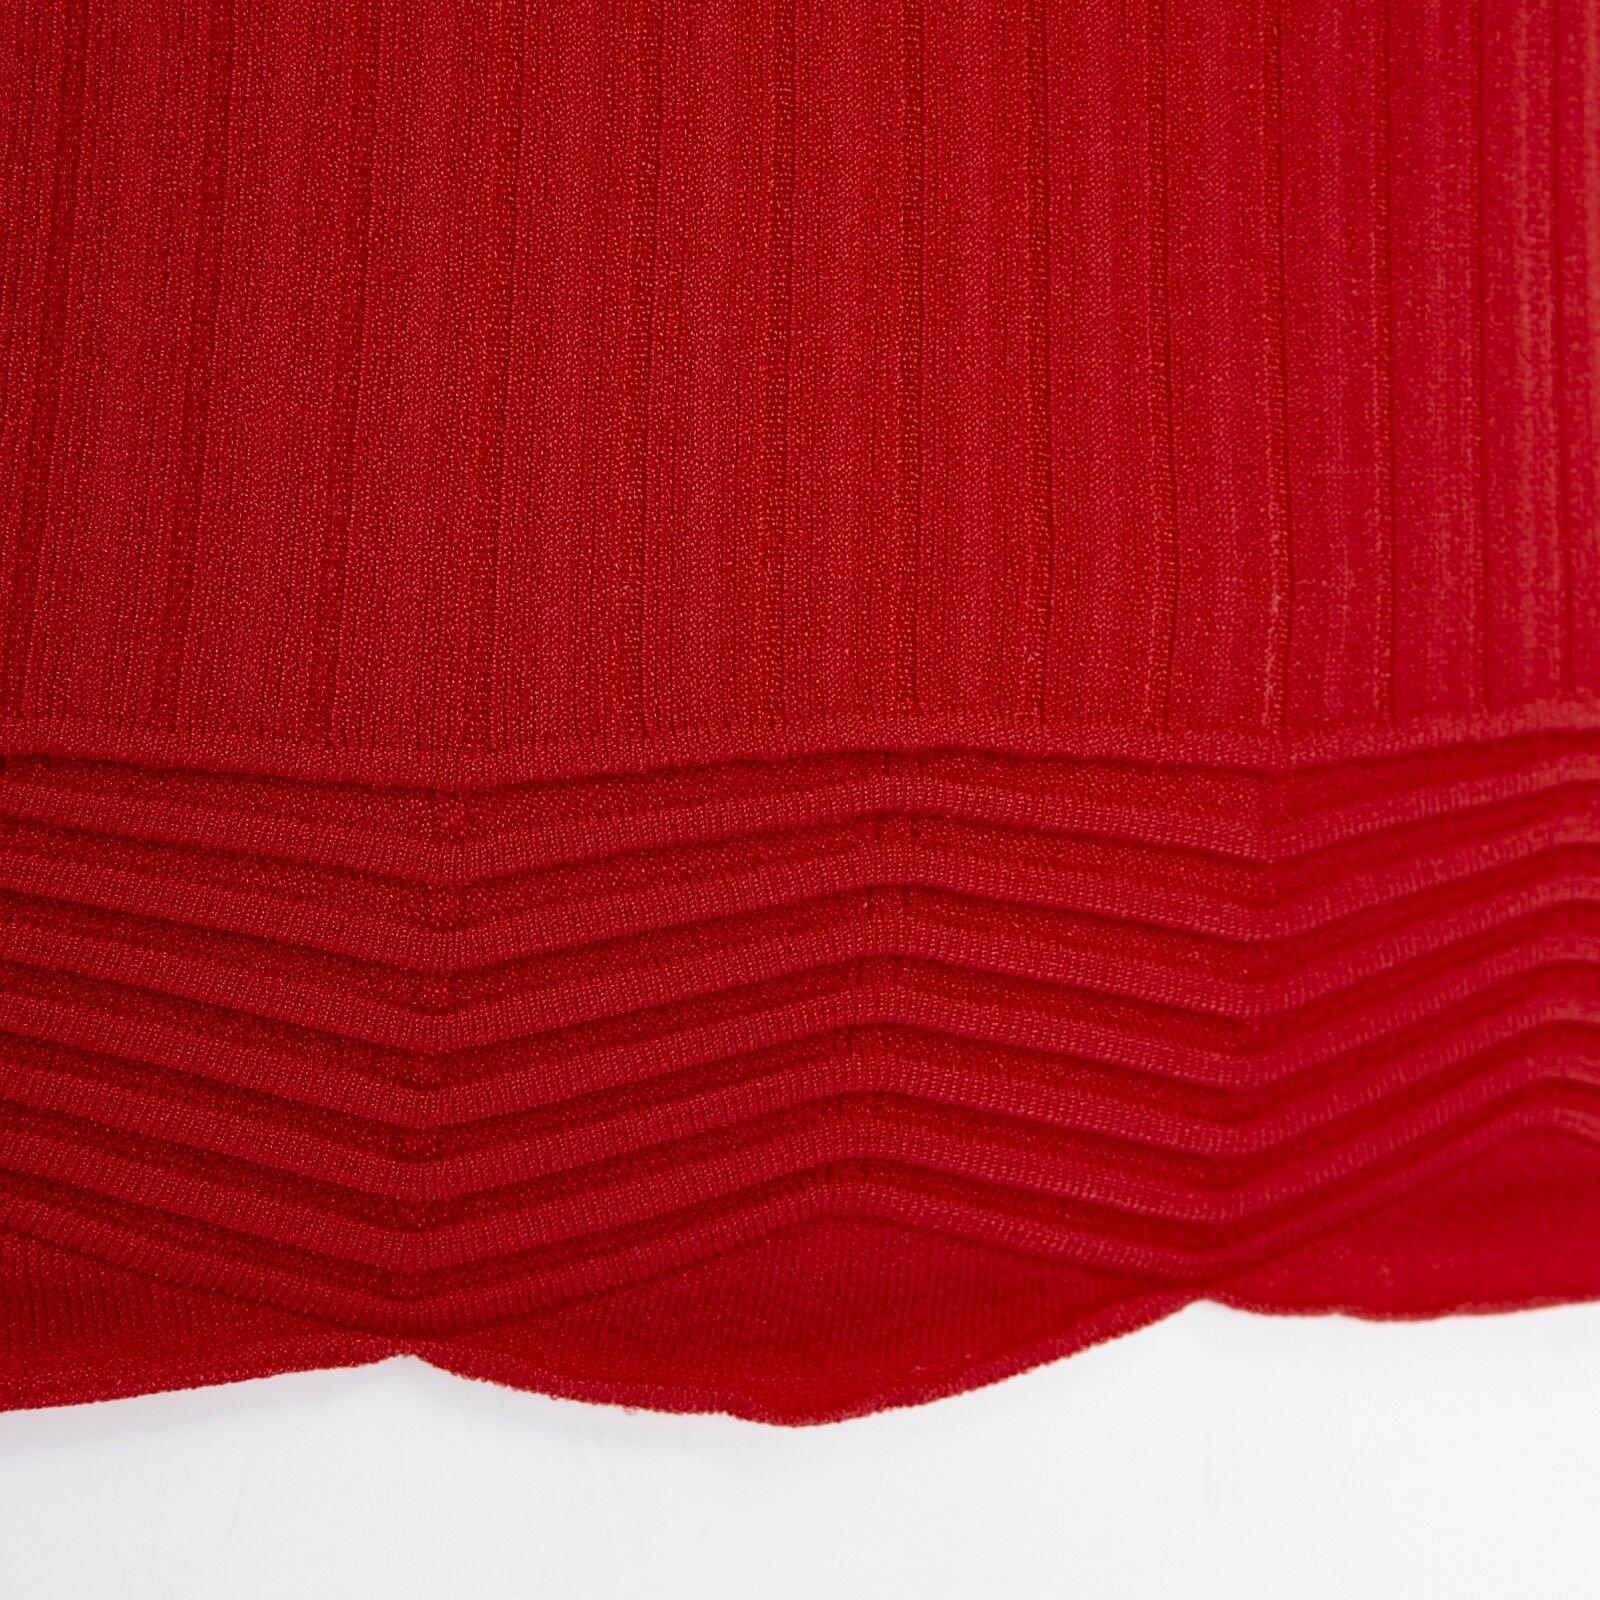 VALENTINO Vintage red viscose blend knitted ribbed hem sleeveless top XS 5